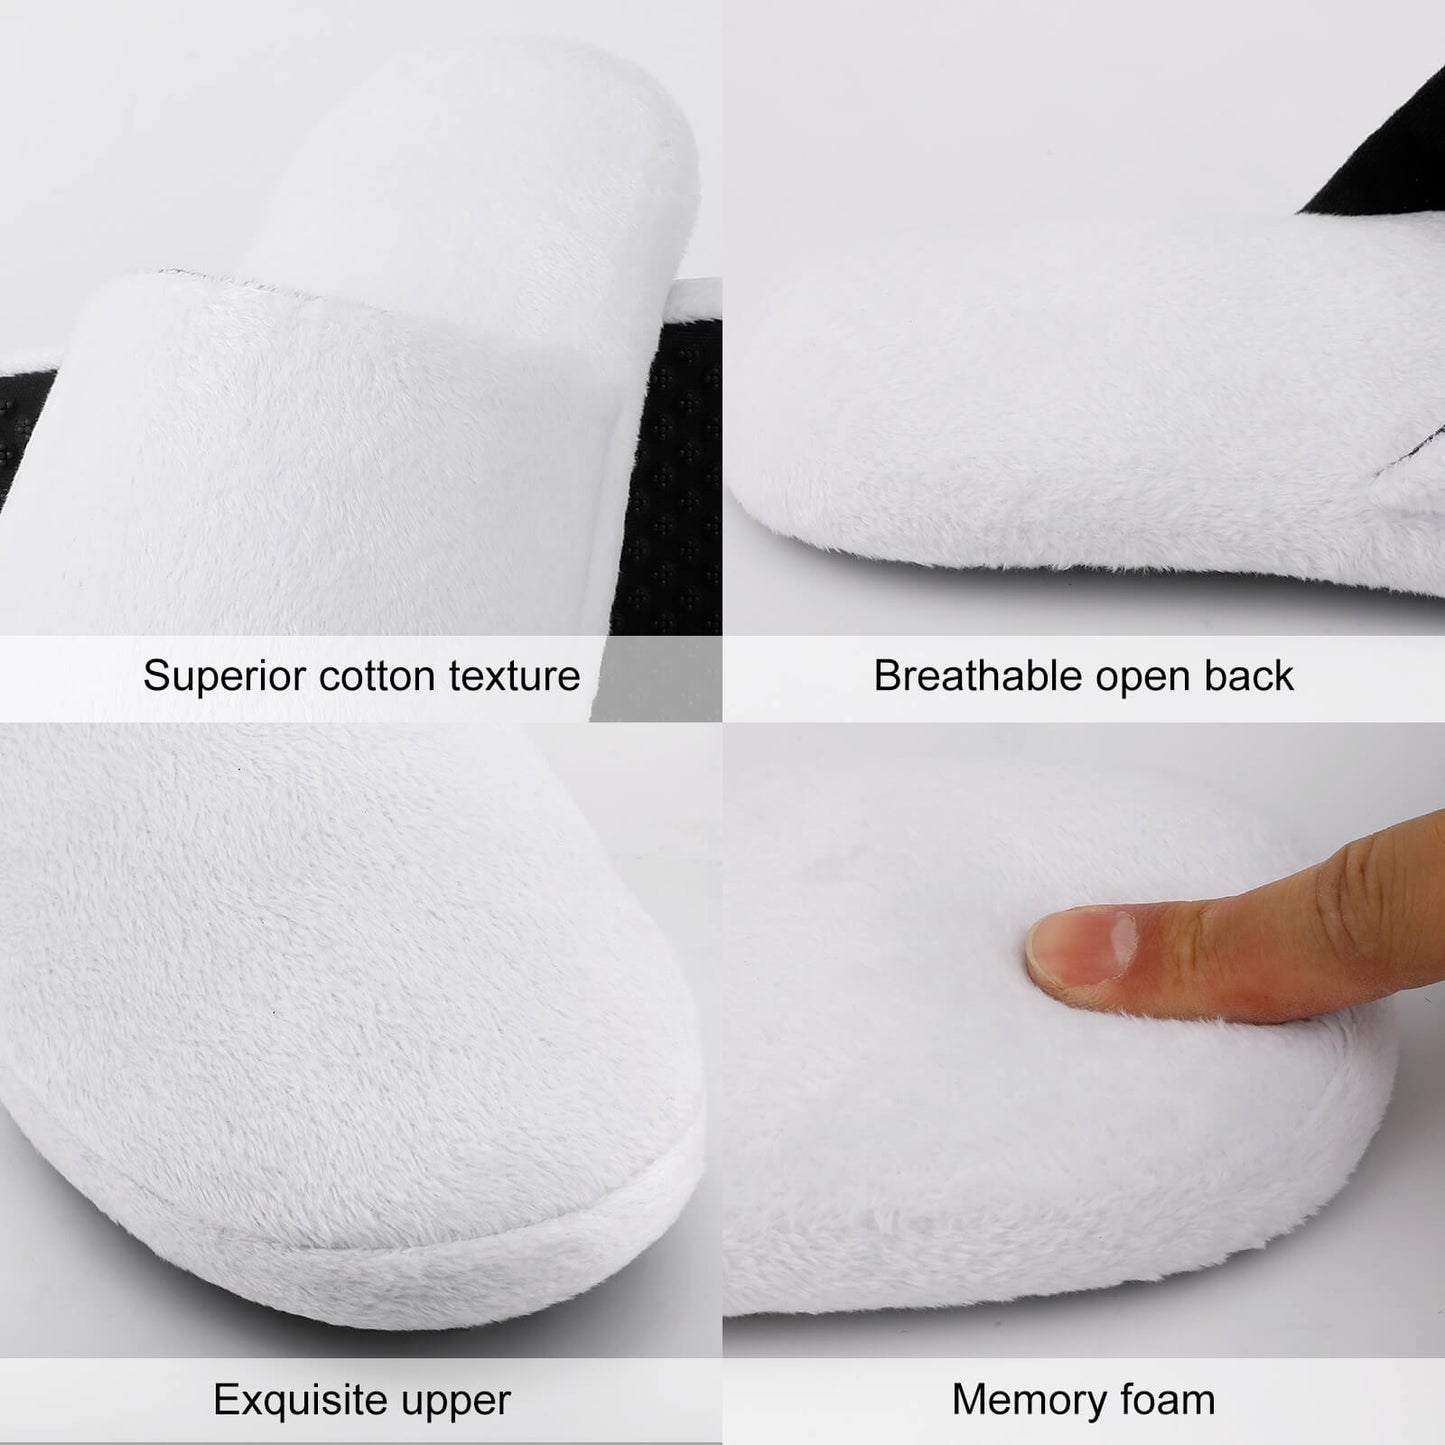 Personalize Your Own Cotton Slippers-Men and Women's Sizes